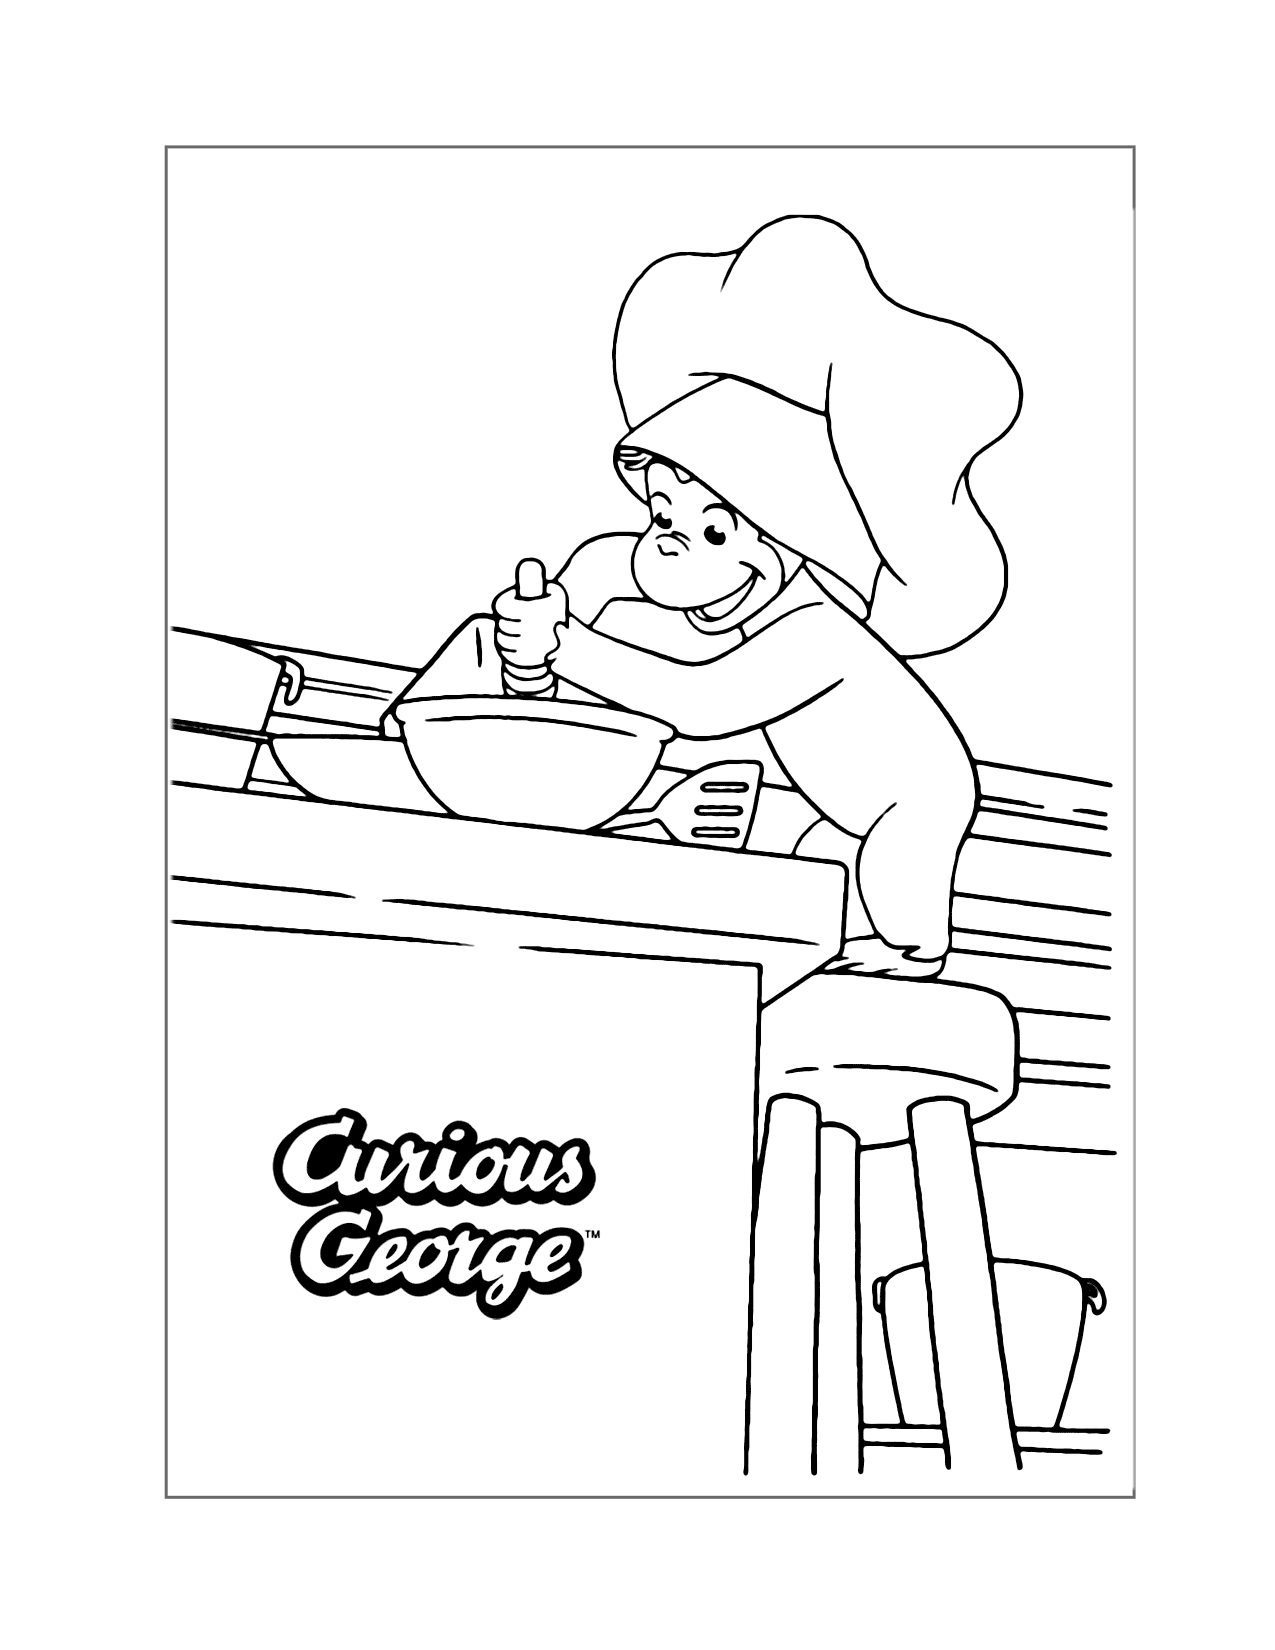 Curious George Baking Coloring Page